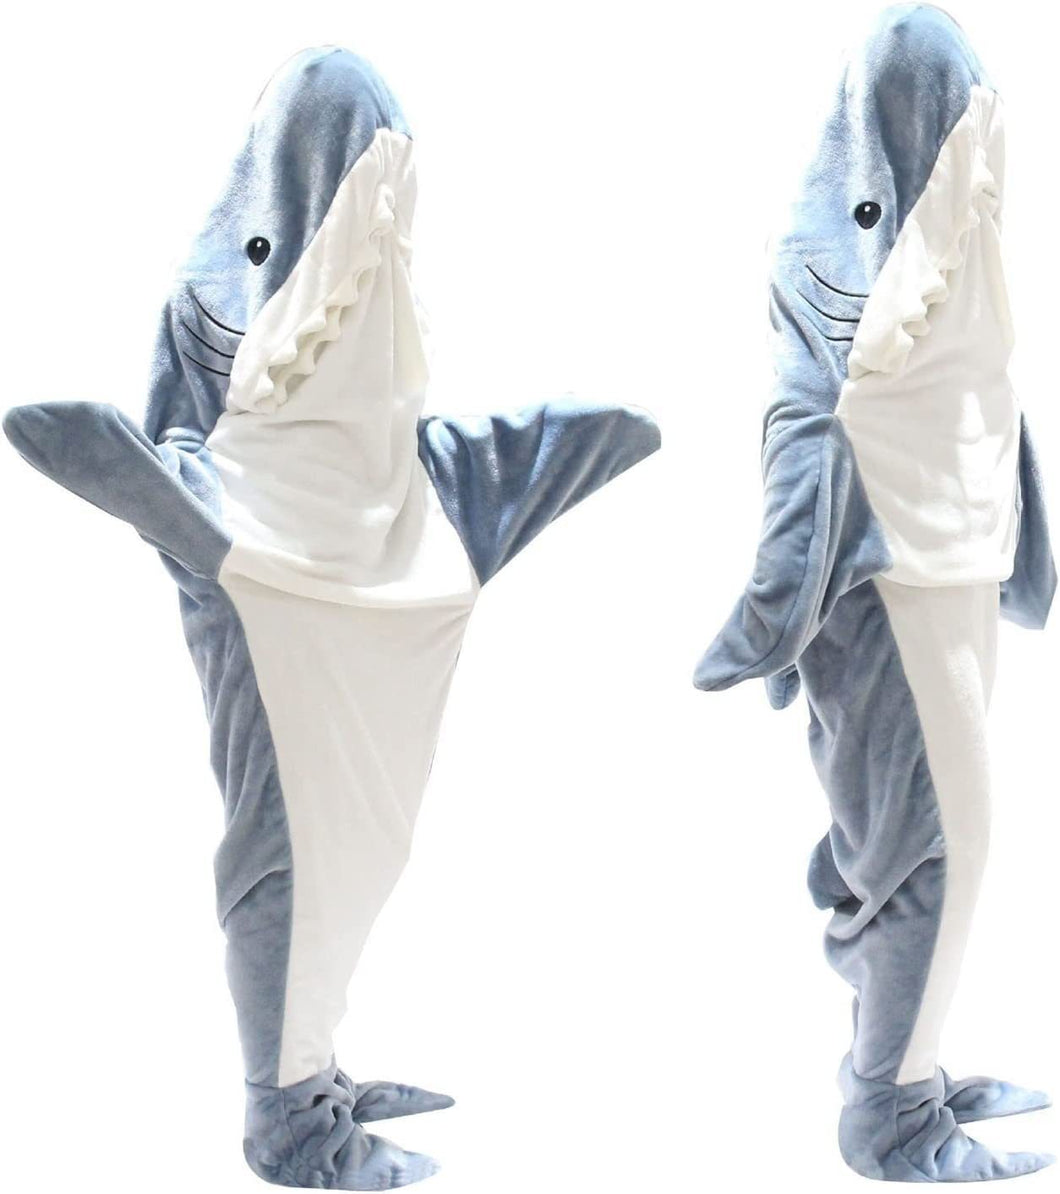 use this cute shark outfit as your me time space and keep you warm during the winter